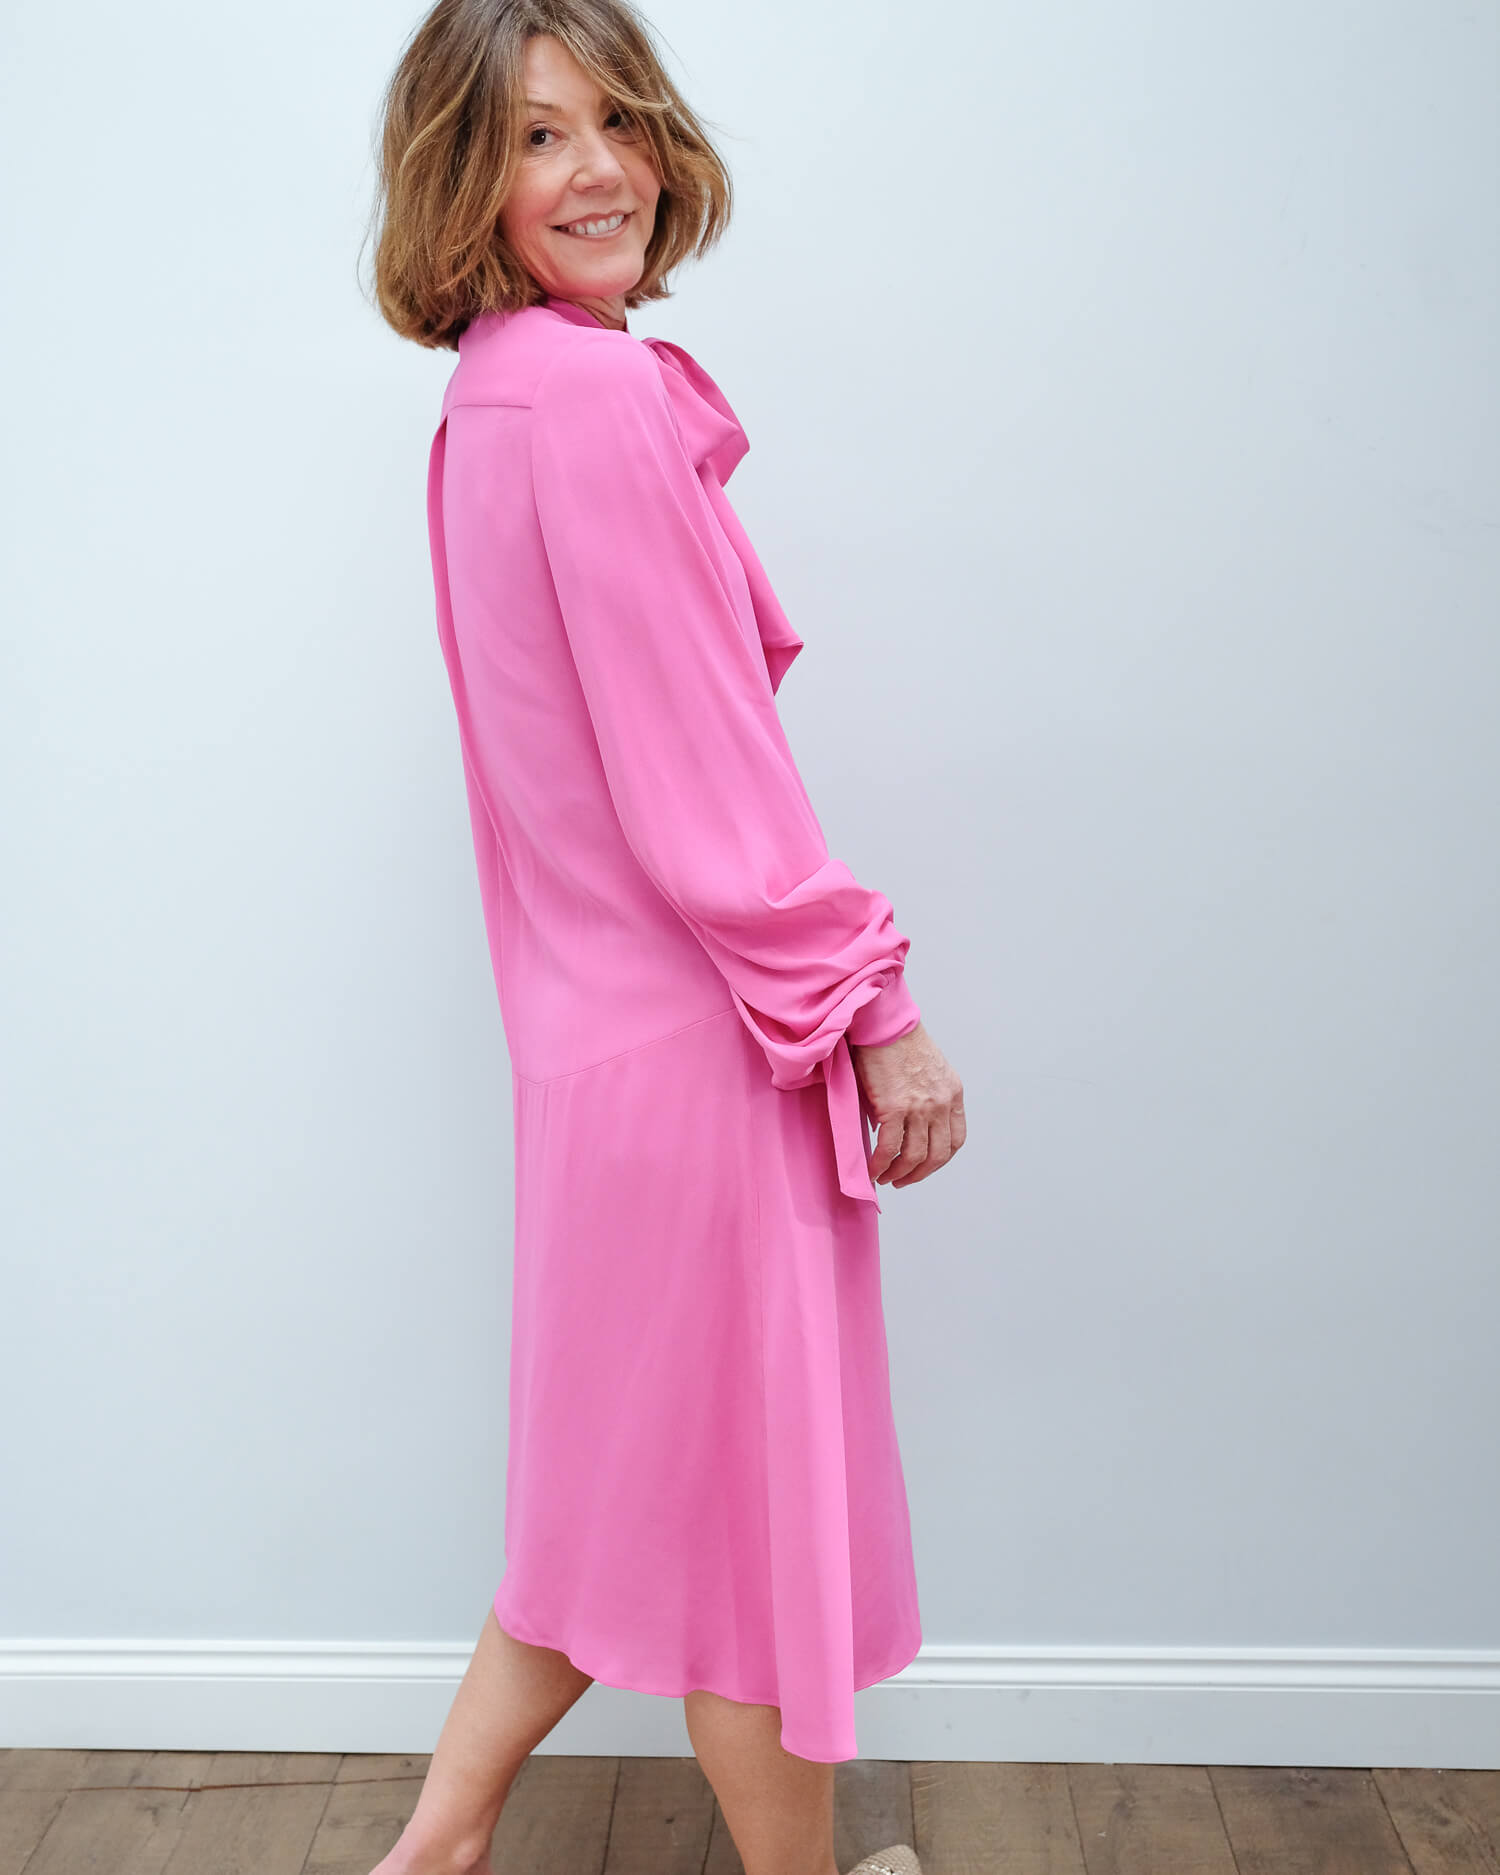 BMB Niccolos dress in pink